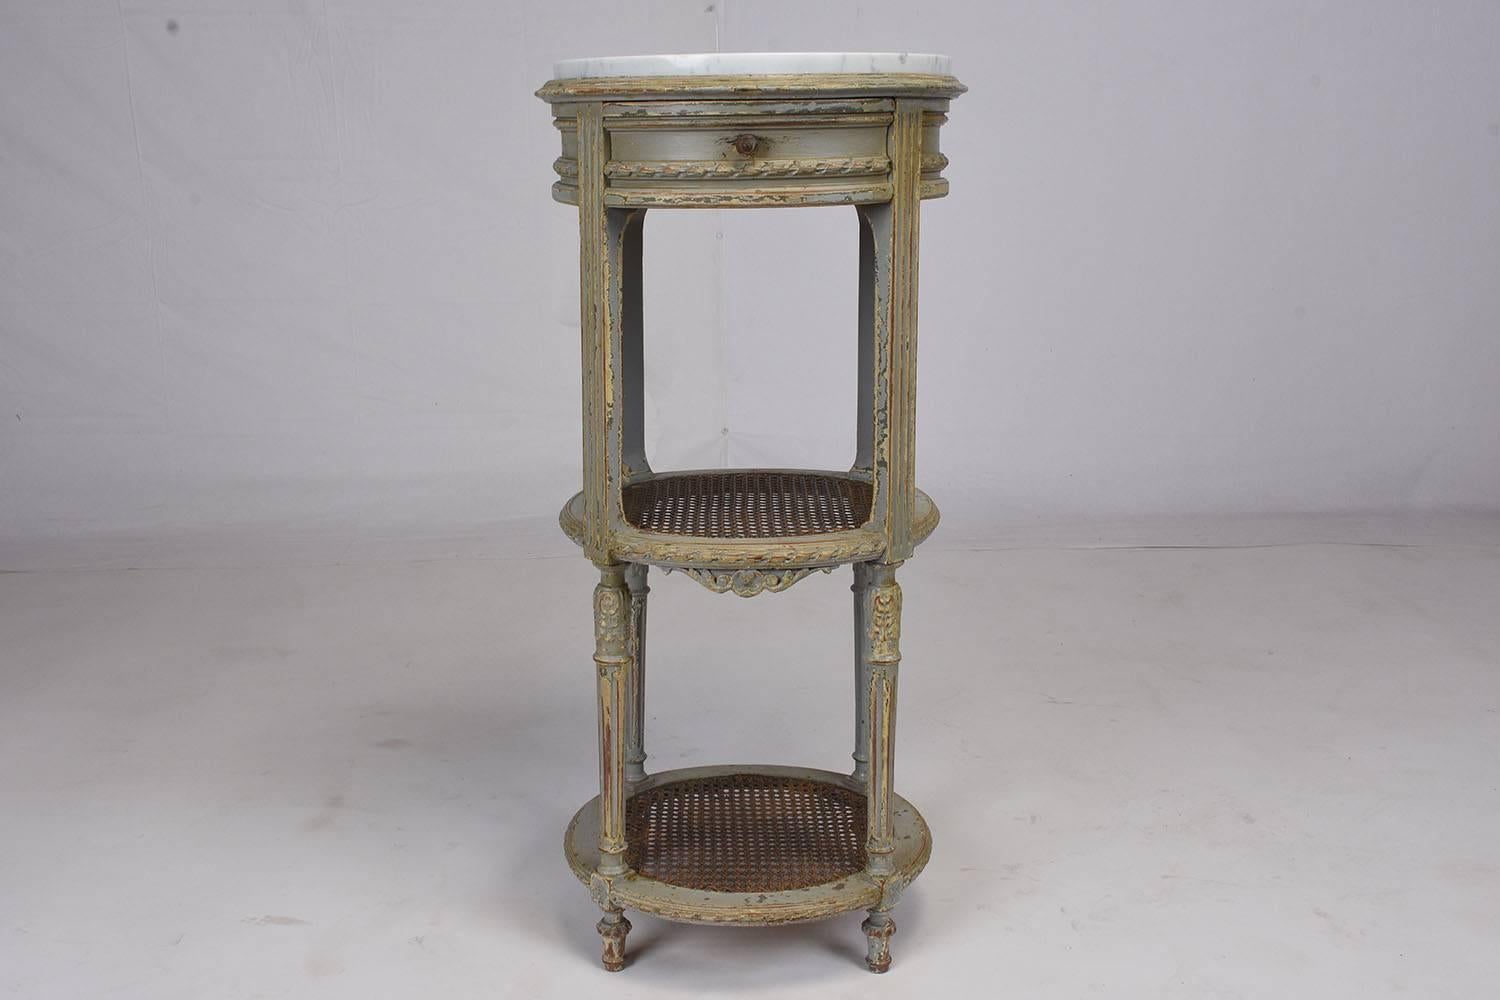 This pair of 1890s French Louis XVI-style nightstands are made for wood that features the original blue and gray color combination with a beautiful distressed finish. The frame features hand-carved details of flowers and garland bands. There is a